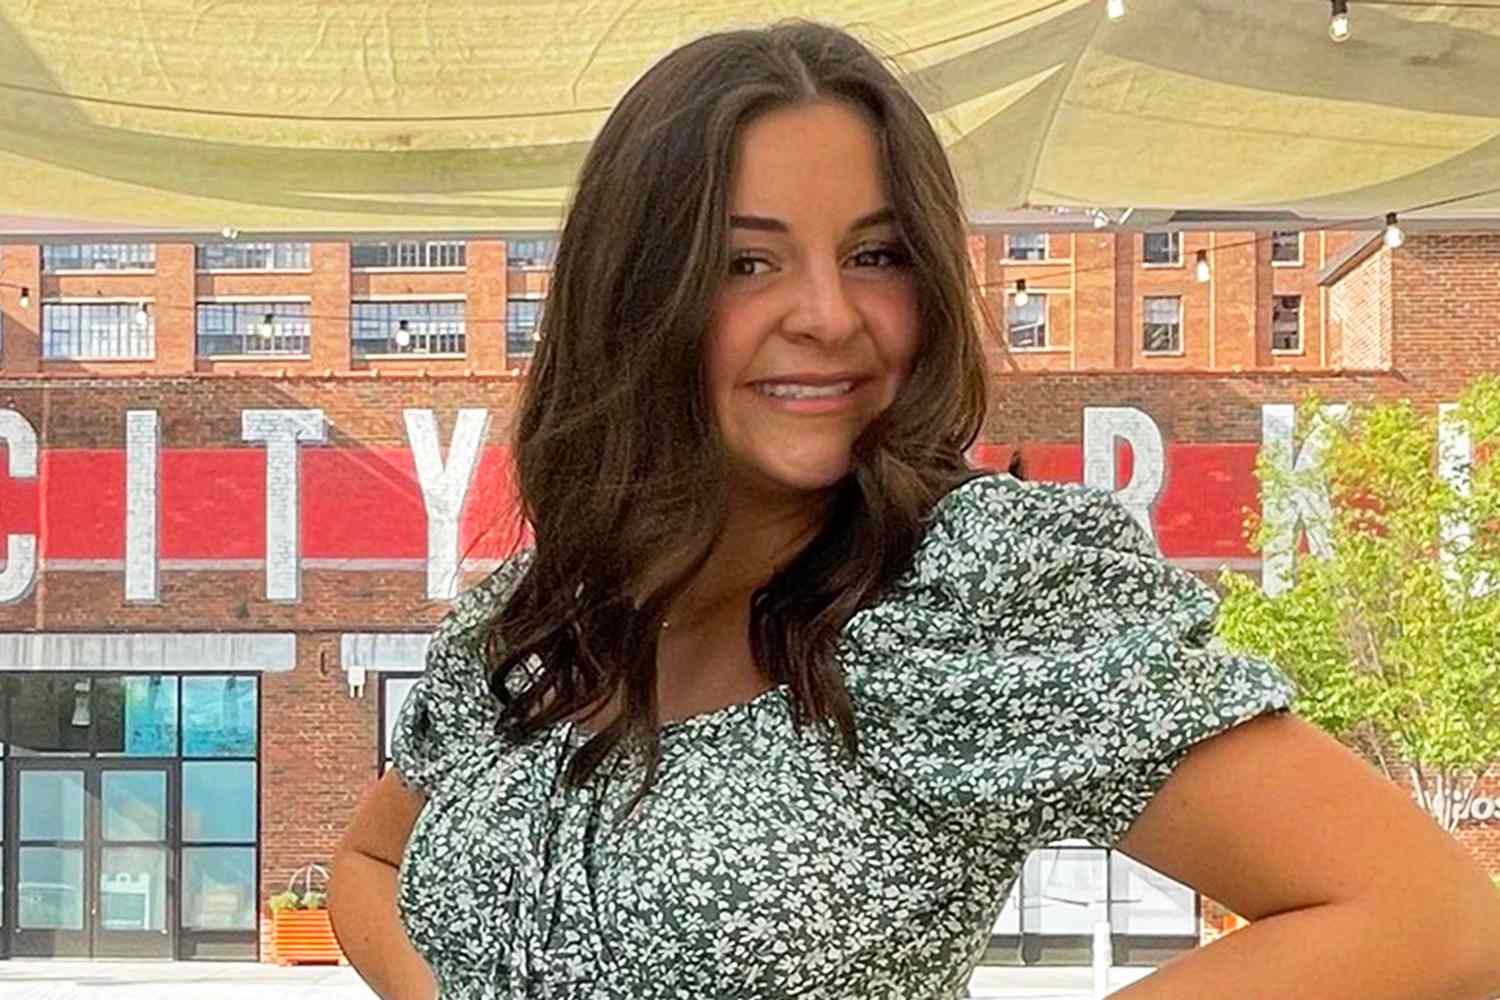 Student Laken Hope Riley Found Dead on University of Georgia Campus